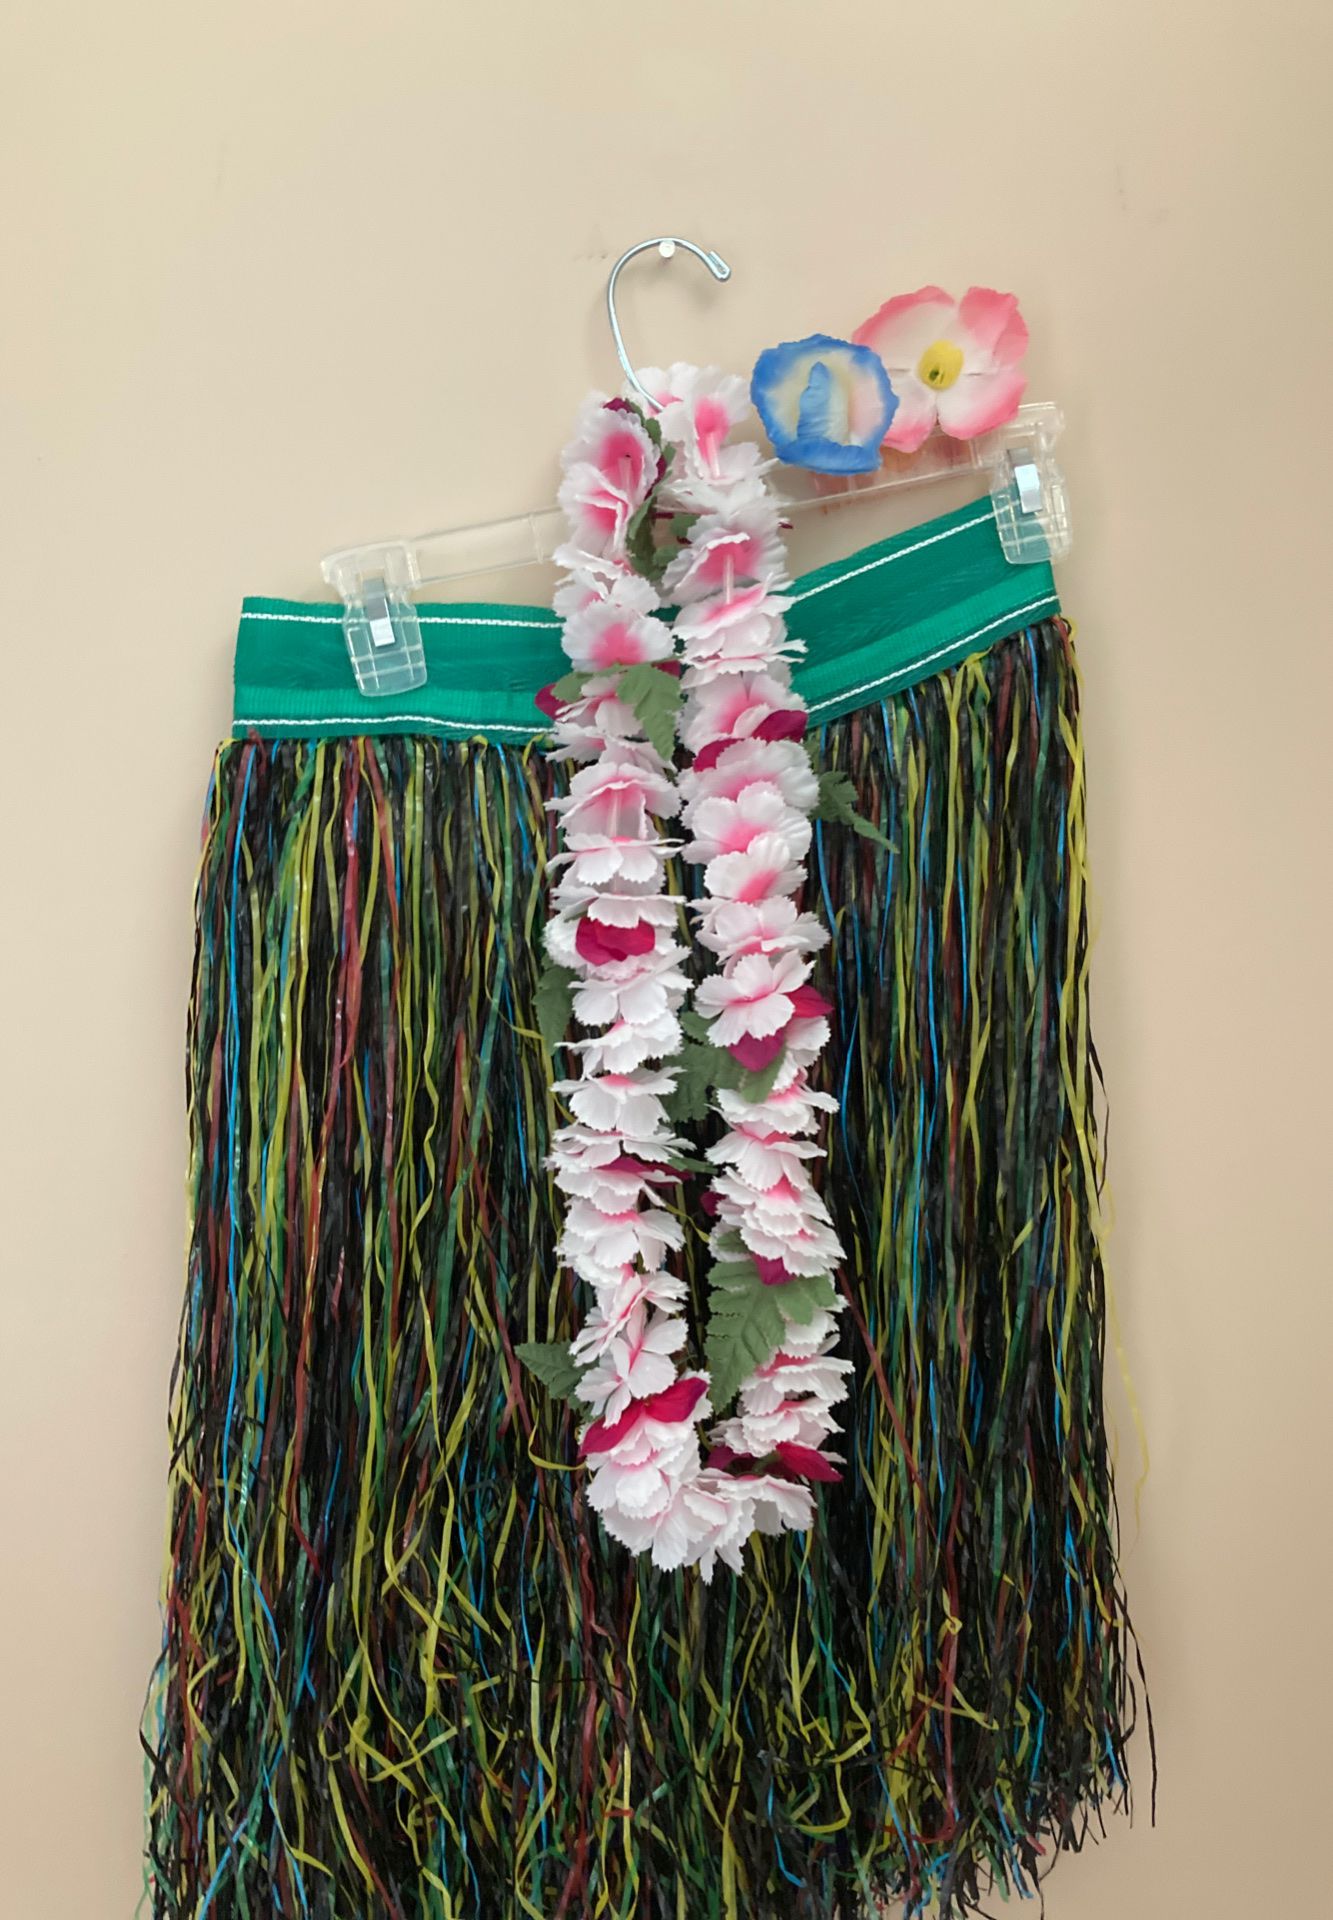 Plastic hula skirt with flower lei and hair flowers